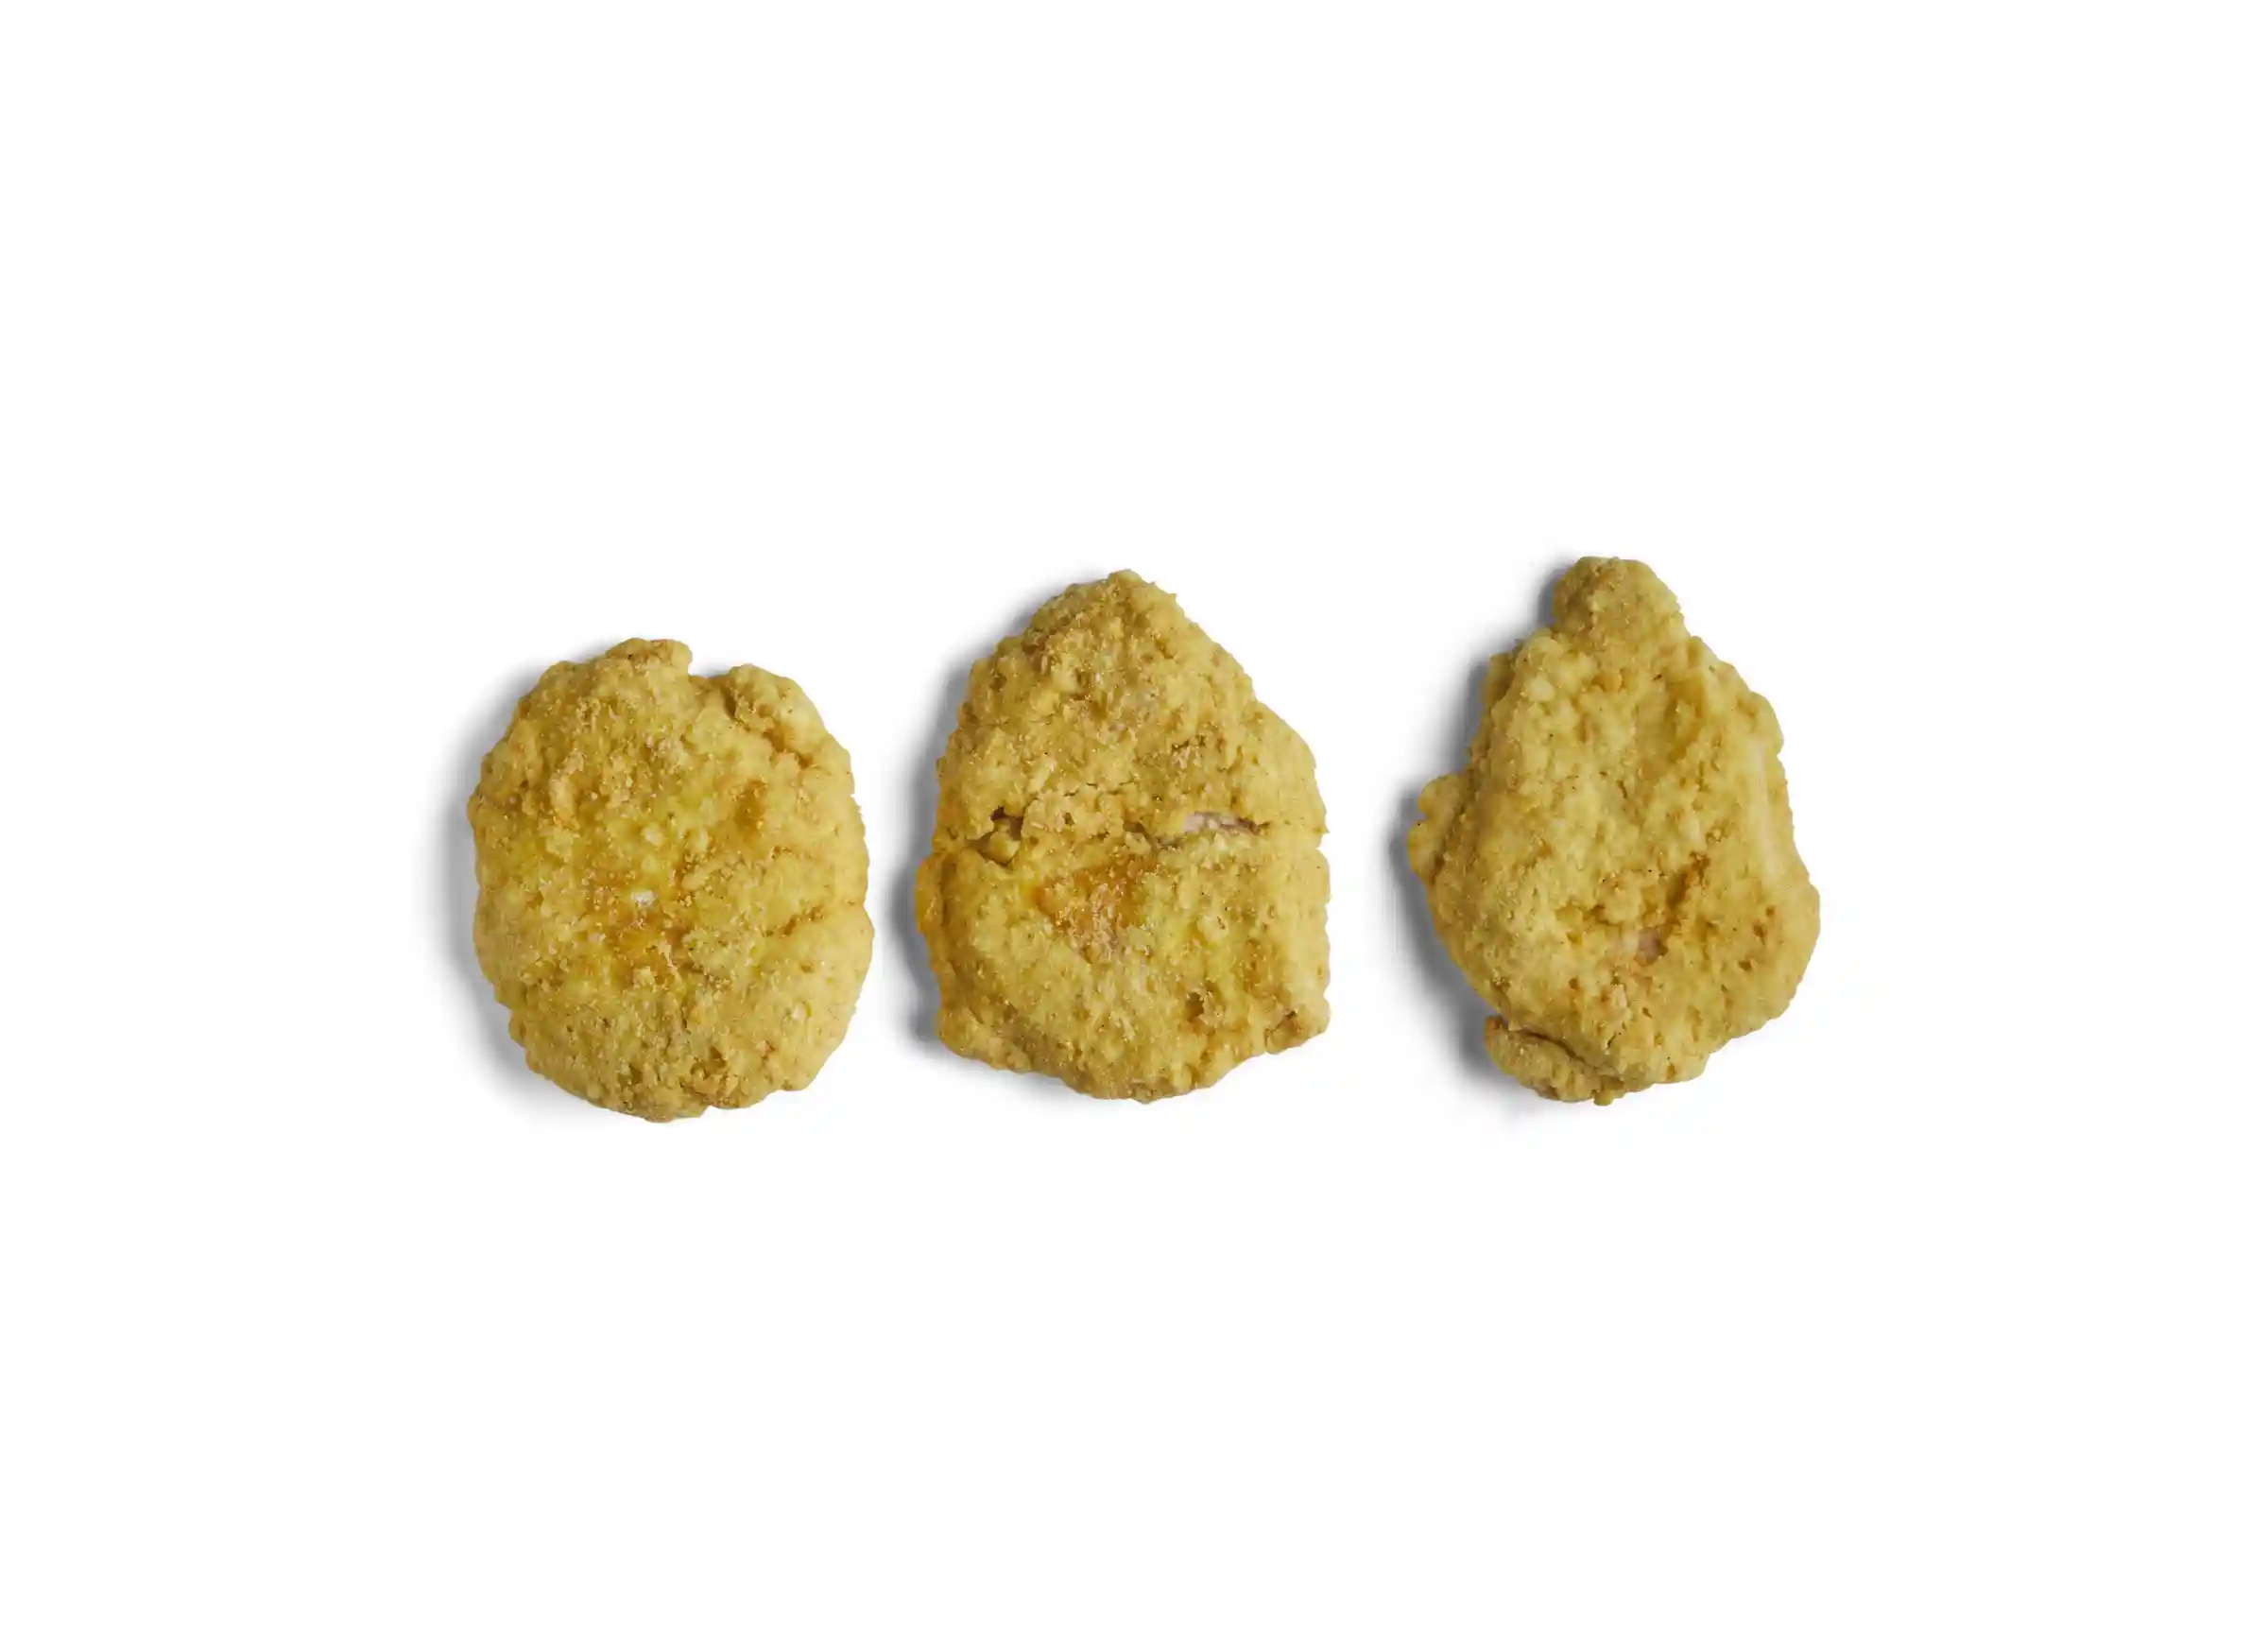 Tyson Red Label® Uncooked Golden Crispy Select Cut Chicken Breast Filet Fritters, 4 oz. _image_11